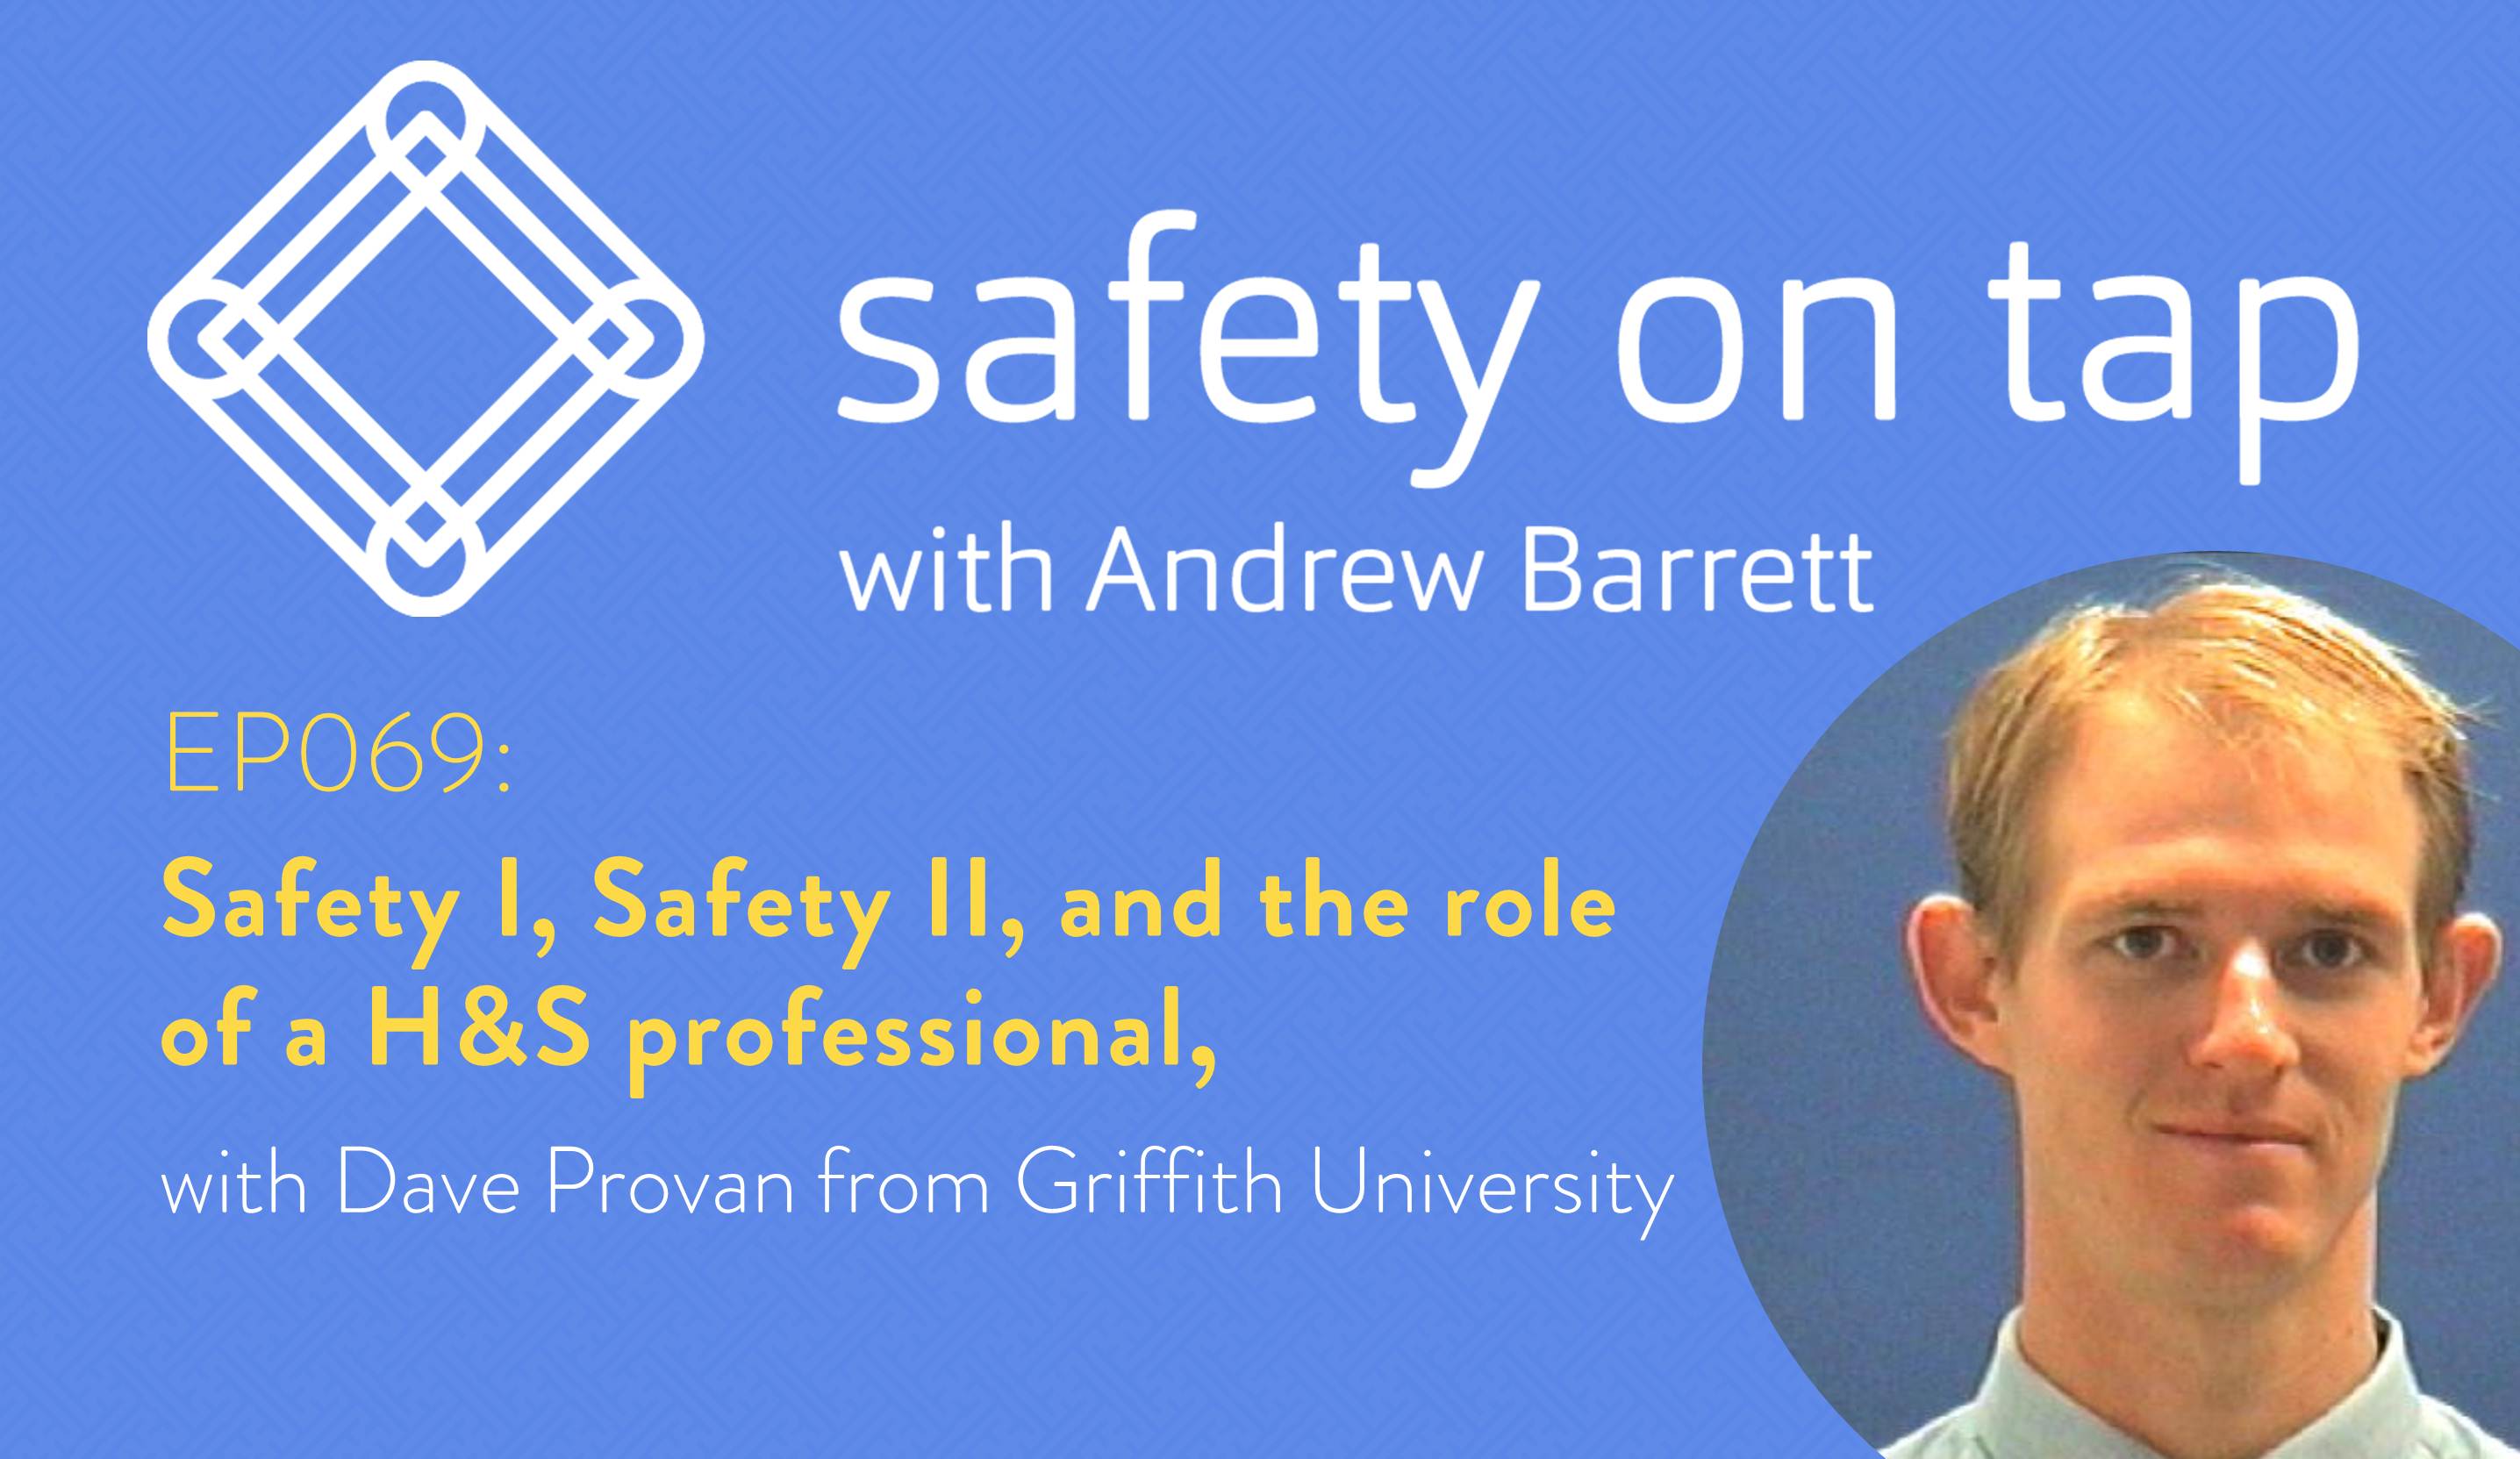 Ep069: Safety I, Safety II, and the role of a H&S professional, with Dave Provan